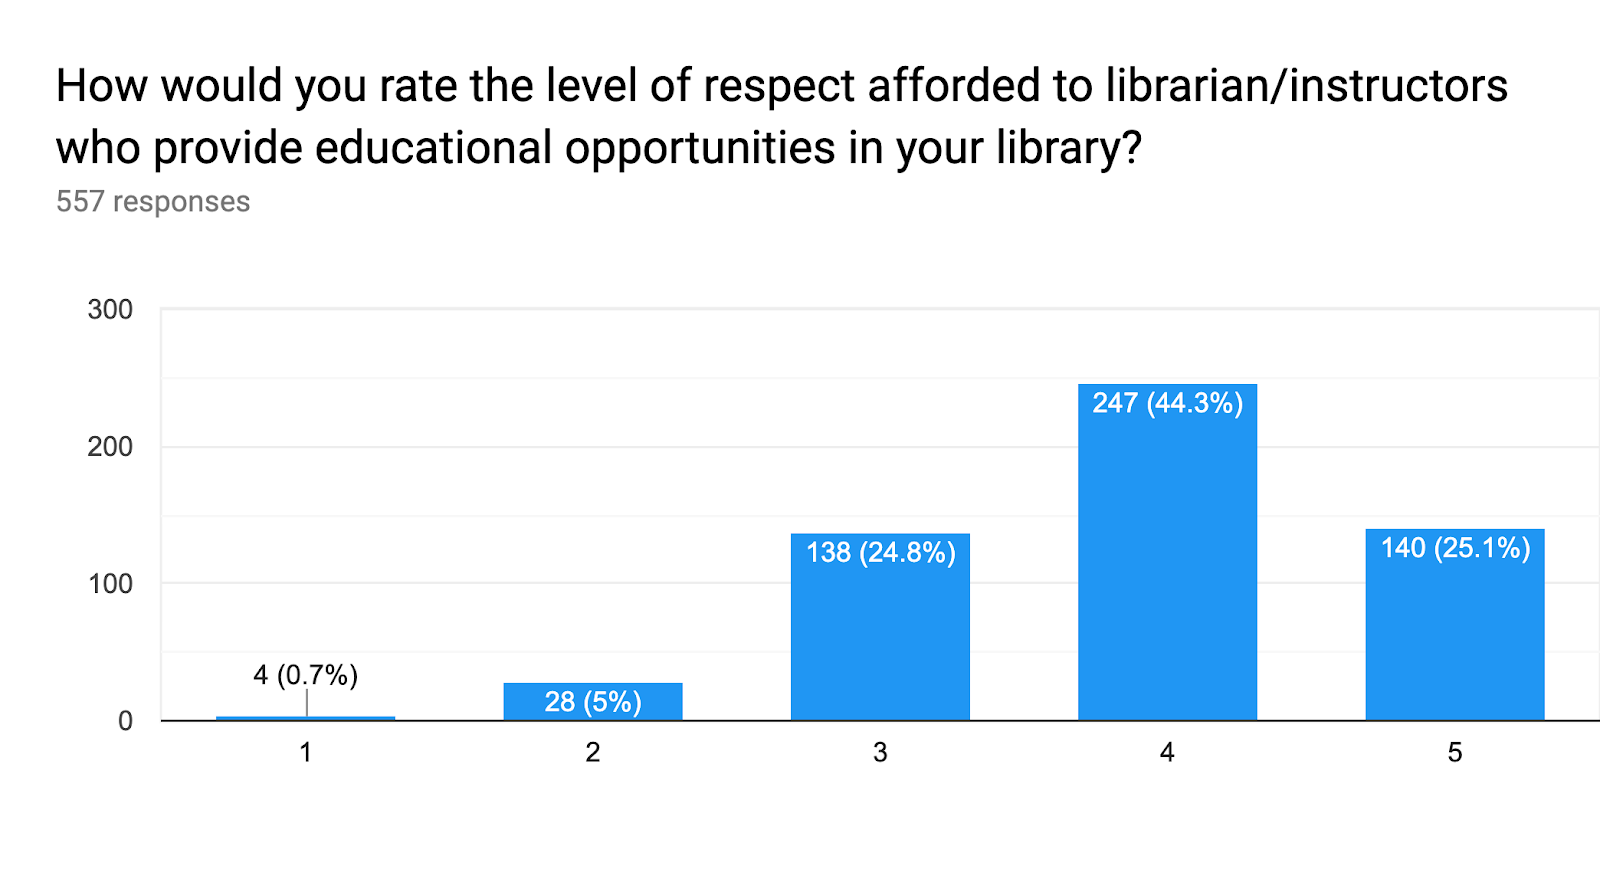 Forms response chart. Question title: How would you rate the level of respect afforded to librarian/instructors who provide educational opportunities in your library?. Number of responses: 557 responses.